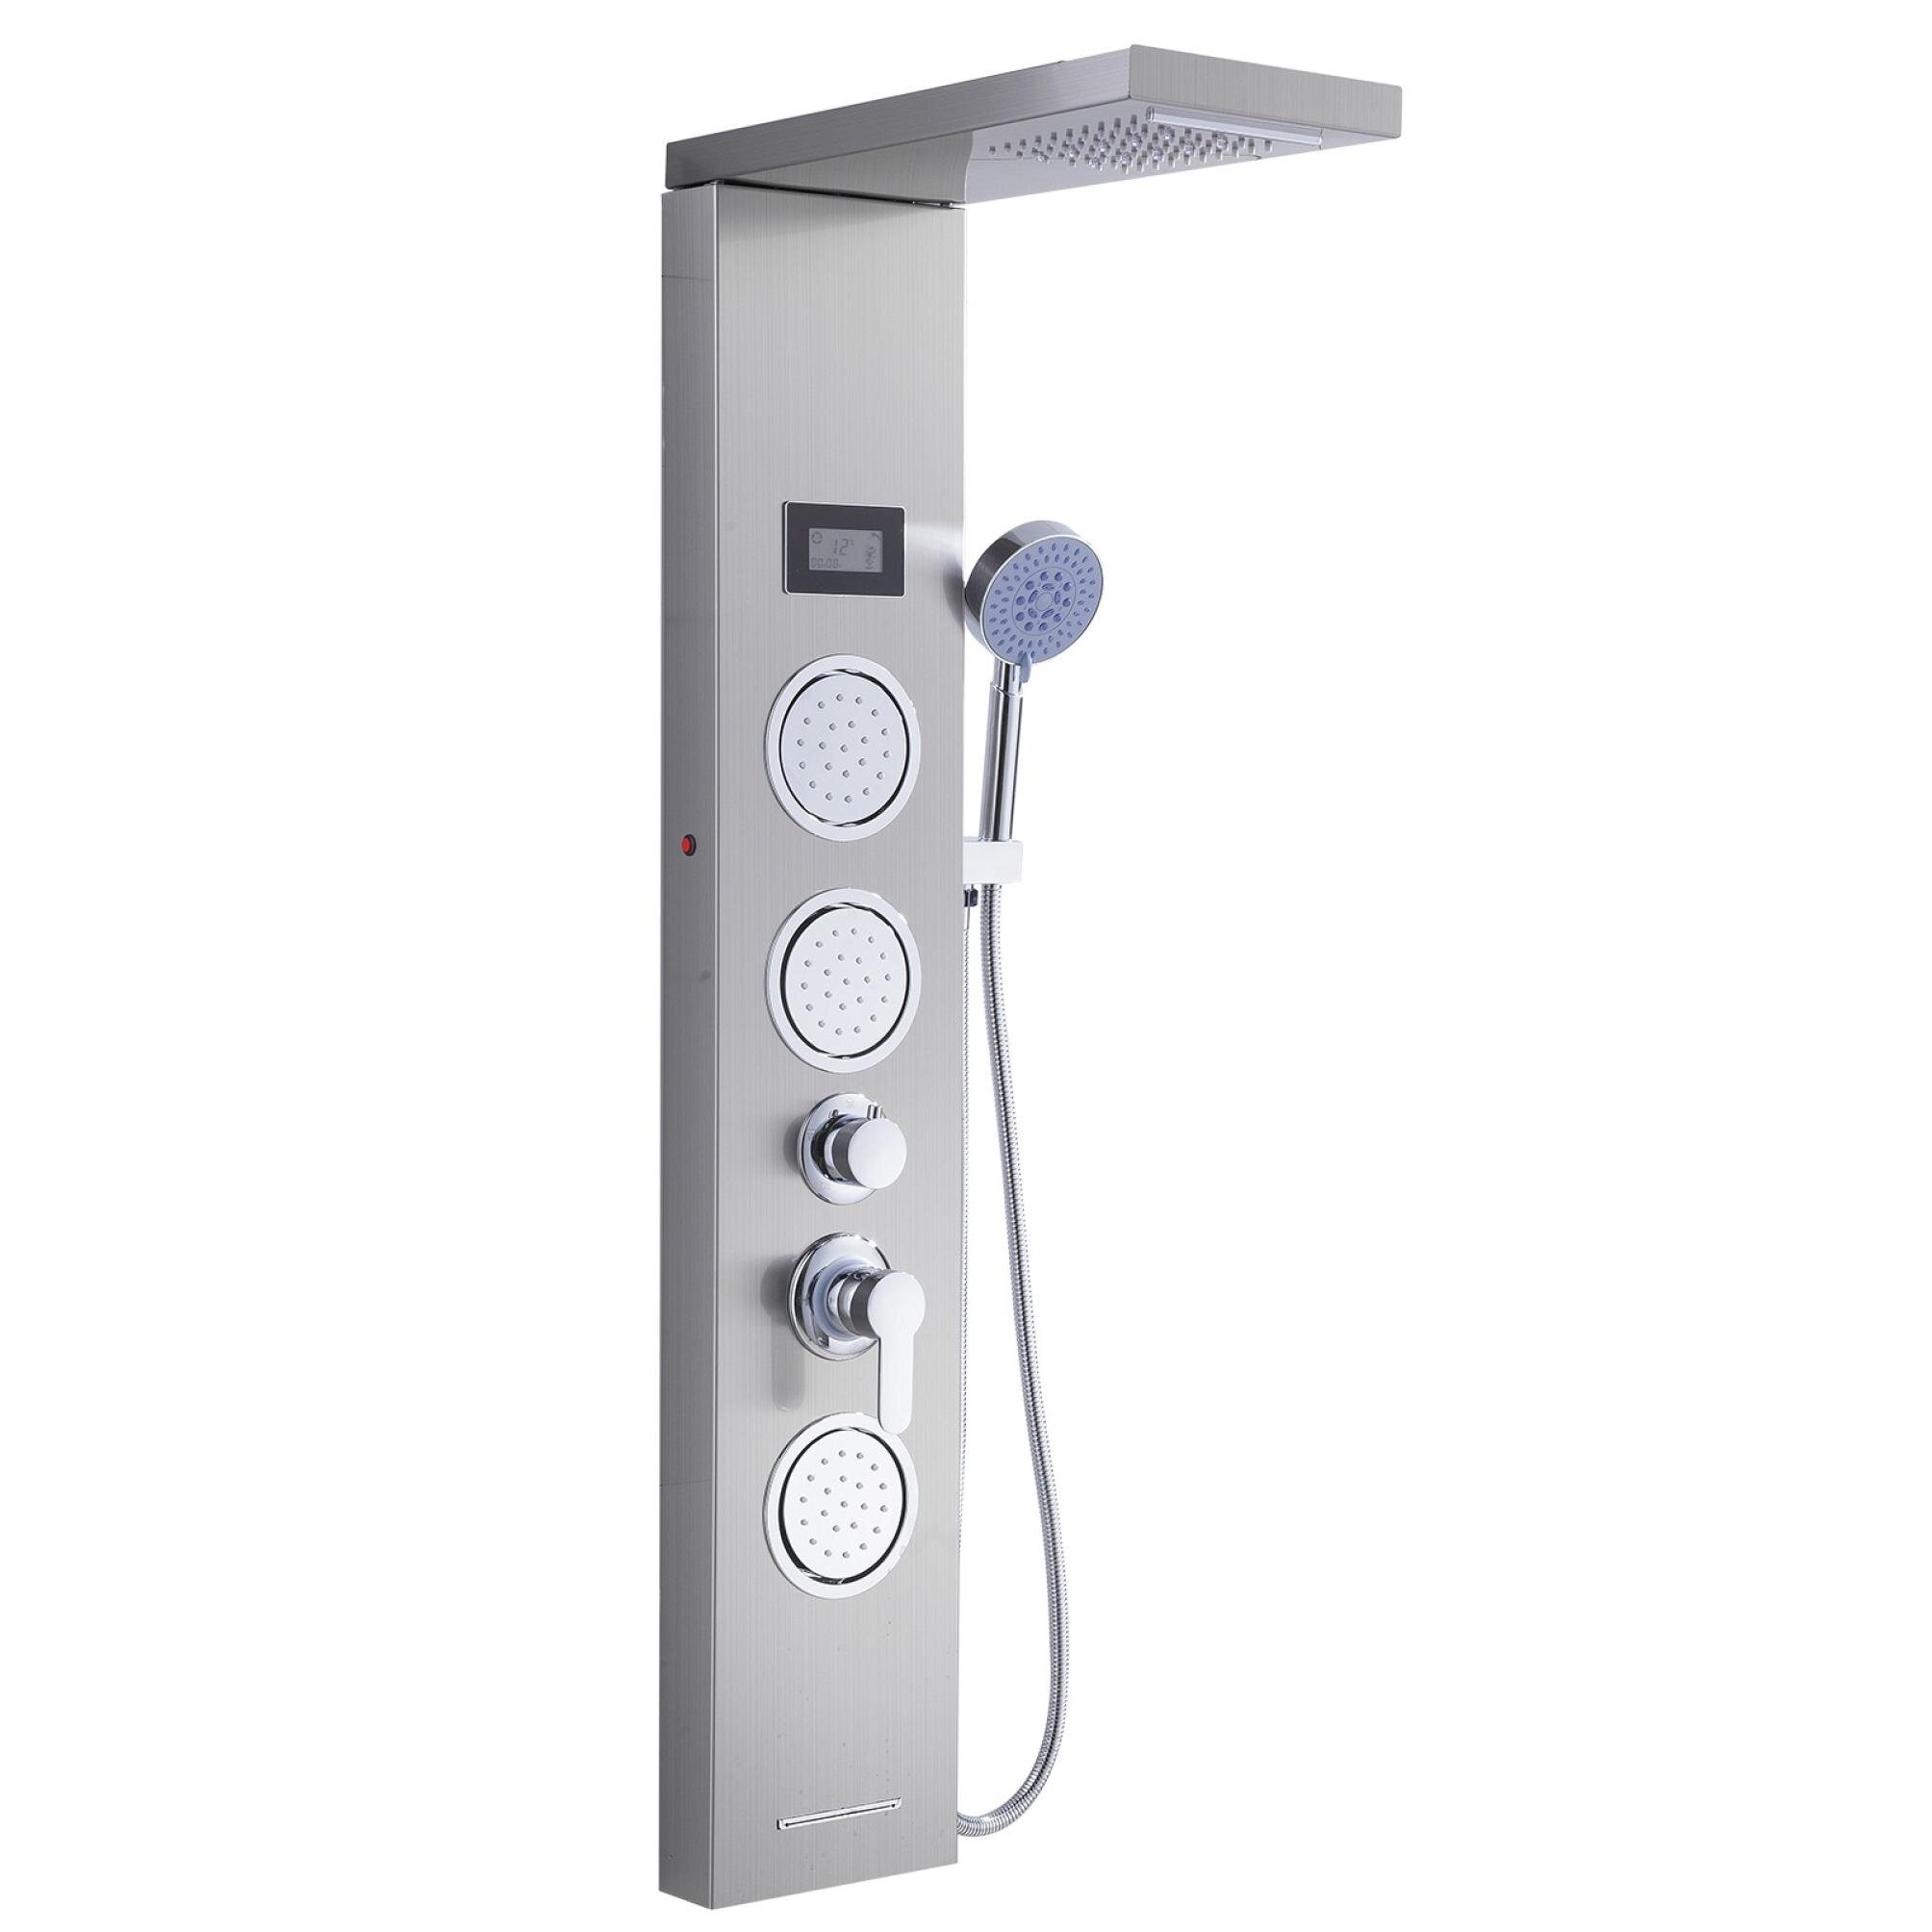 lyrlody Shower Tower Bathroom Shower Panel System Handheld Shower Waterfall Bathroom Shower Body Jets 3 in 1 with Thermostatic LED Temperature Screen Stainless Steel